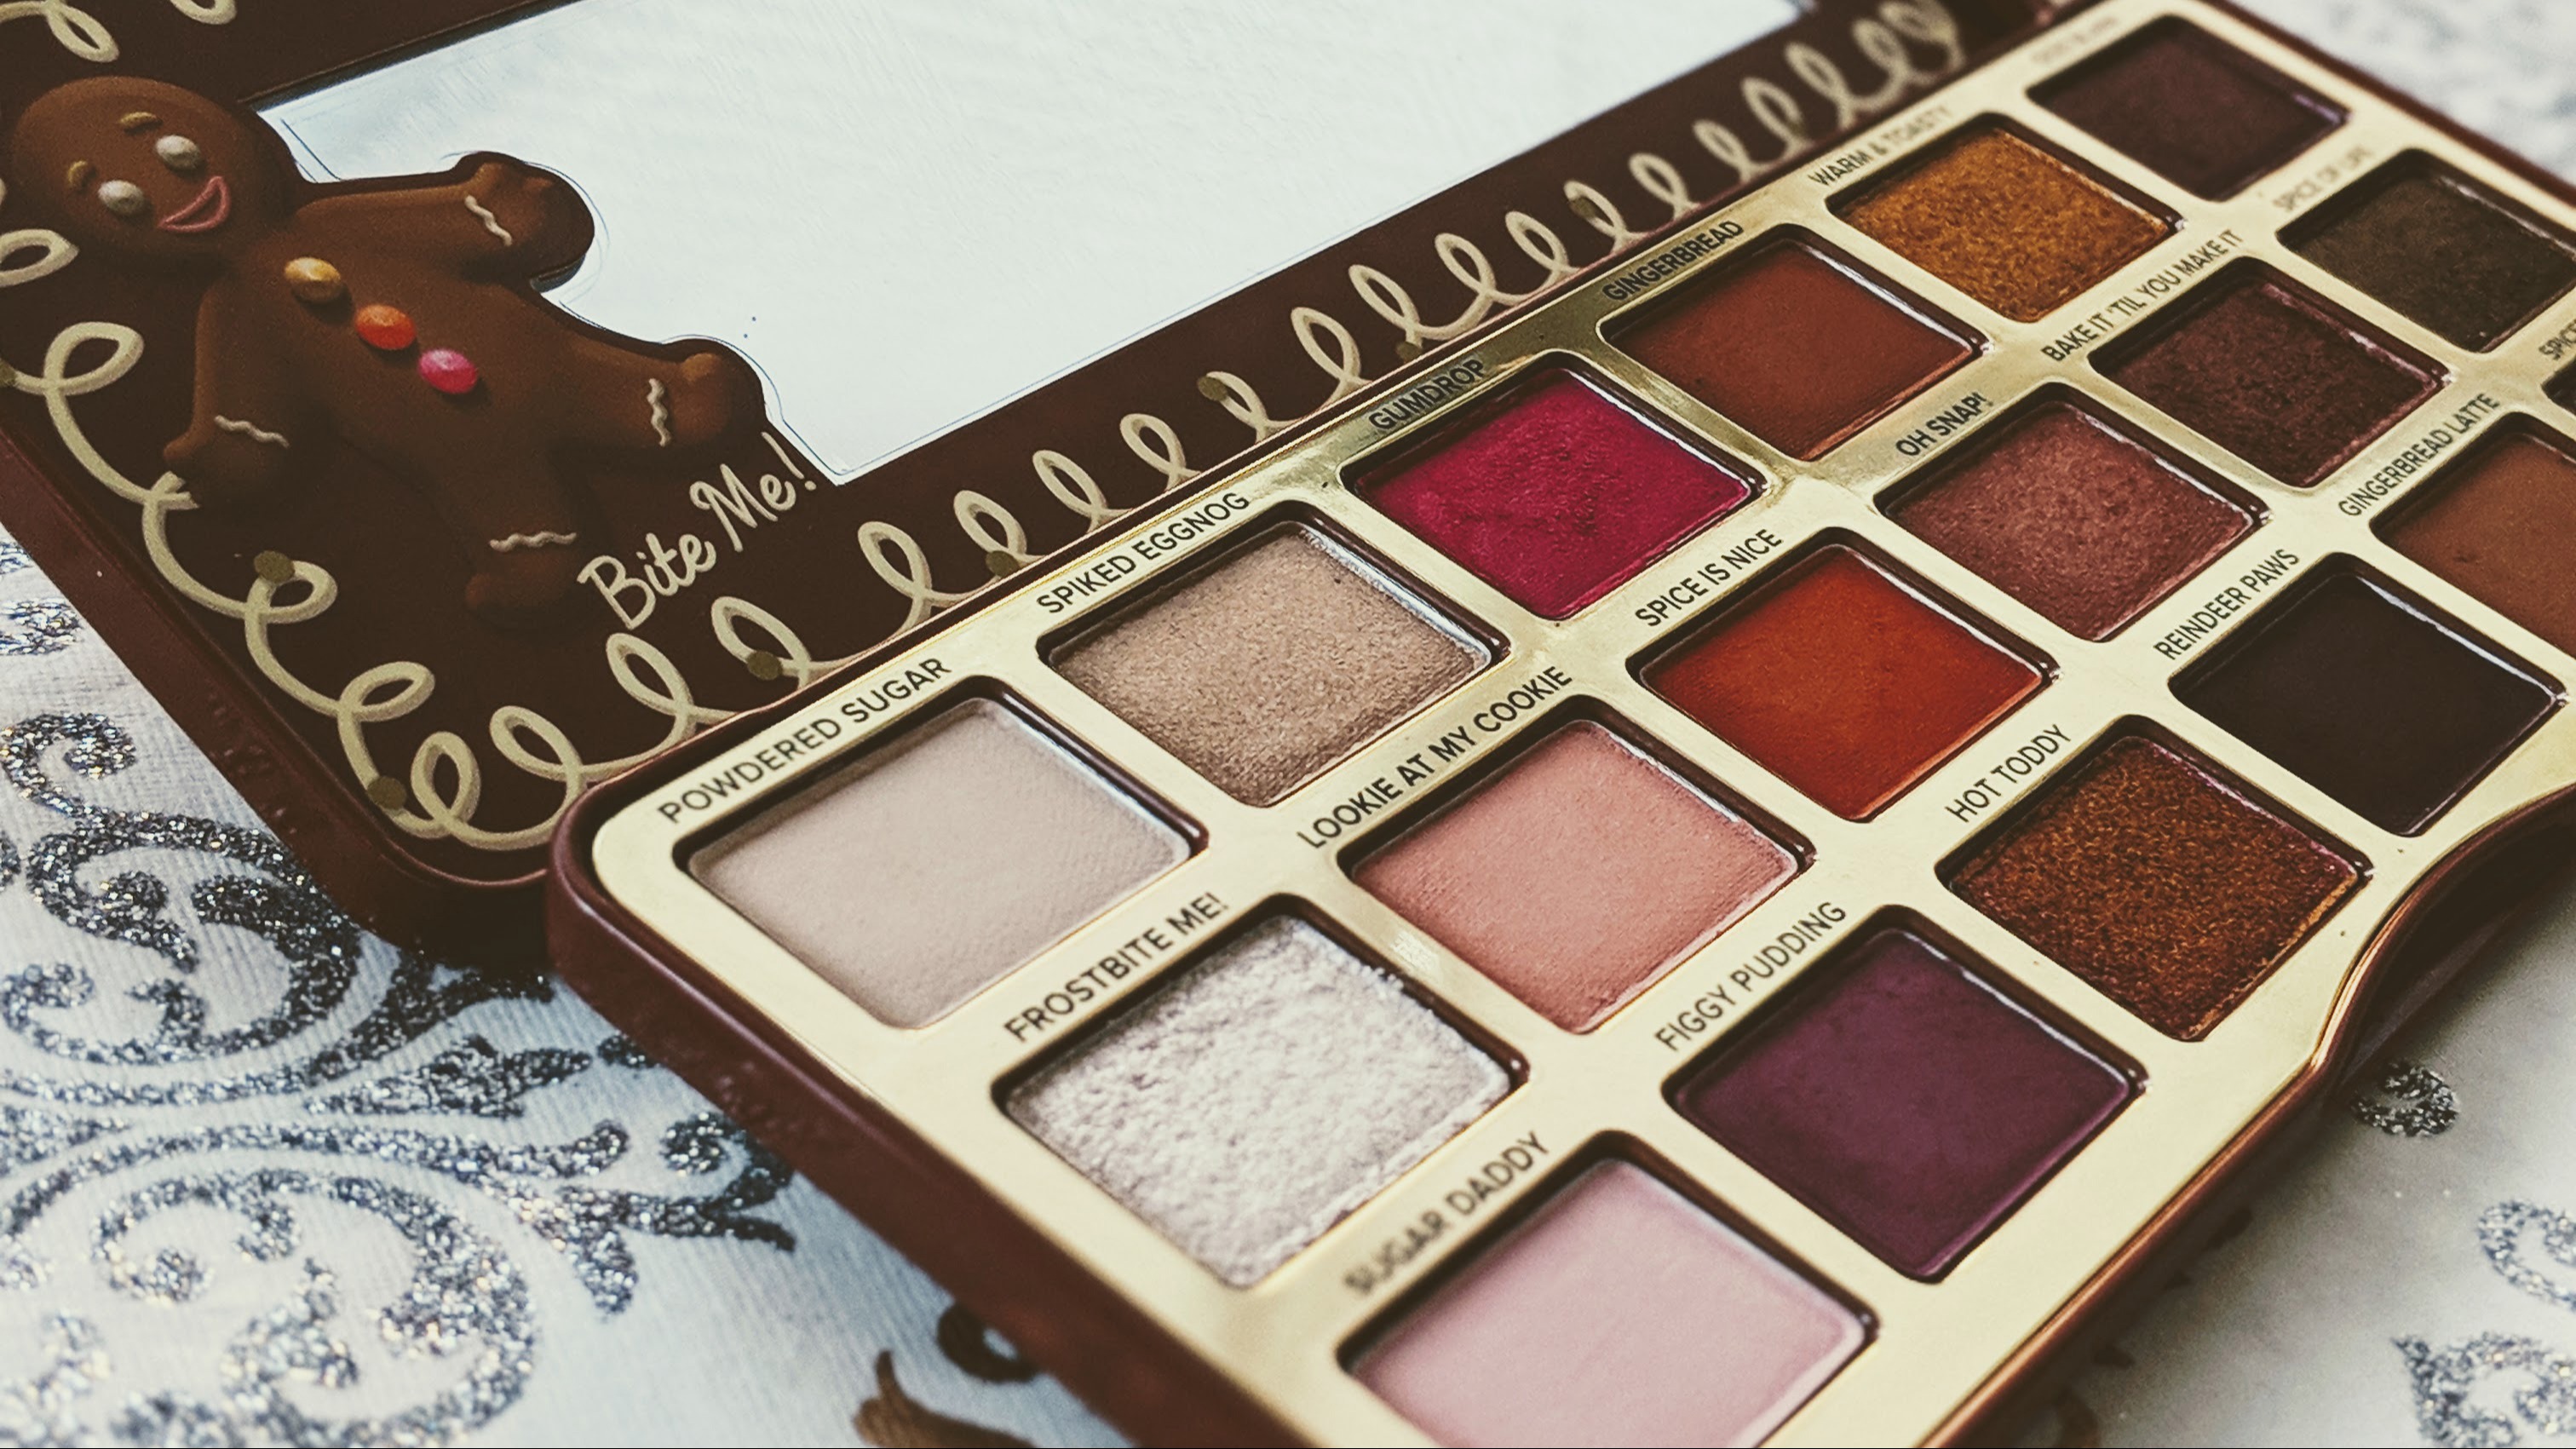 The Too Faced Gingerbread Spice Palette ($49USD/$59CAD) has 18 colors consi...